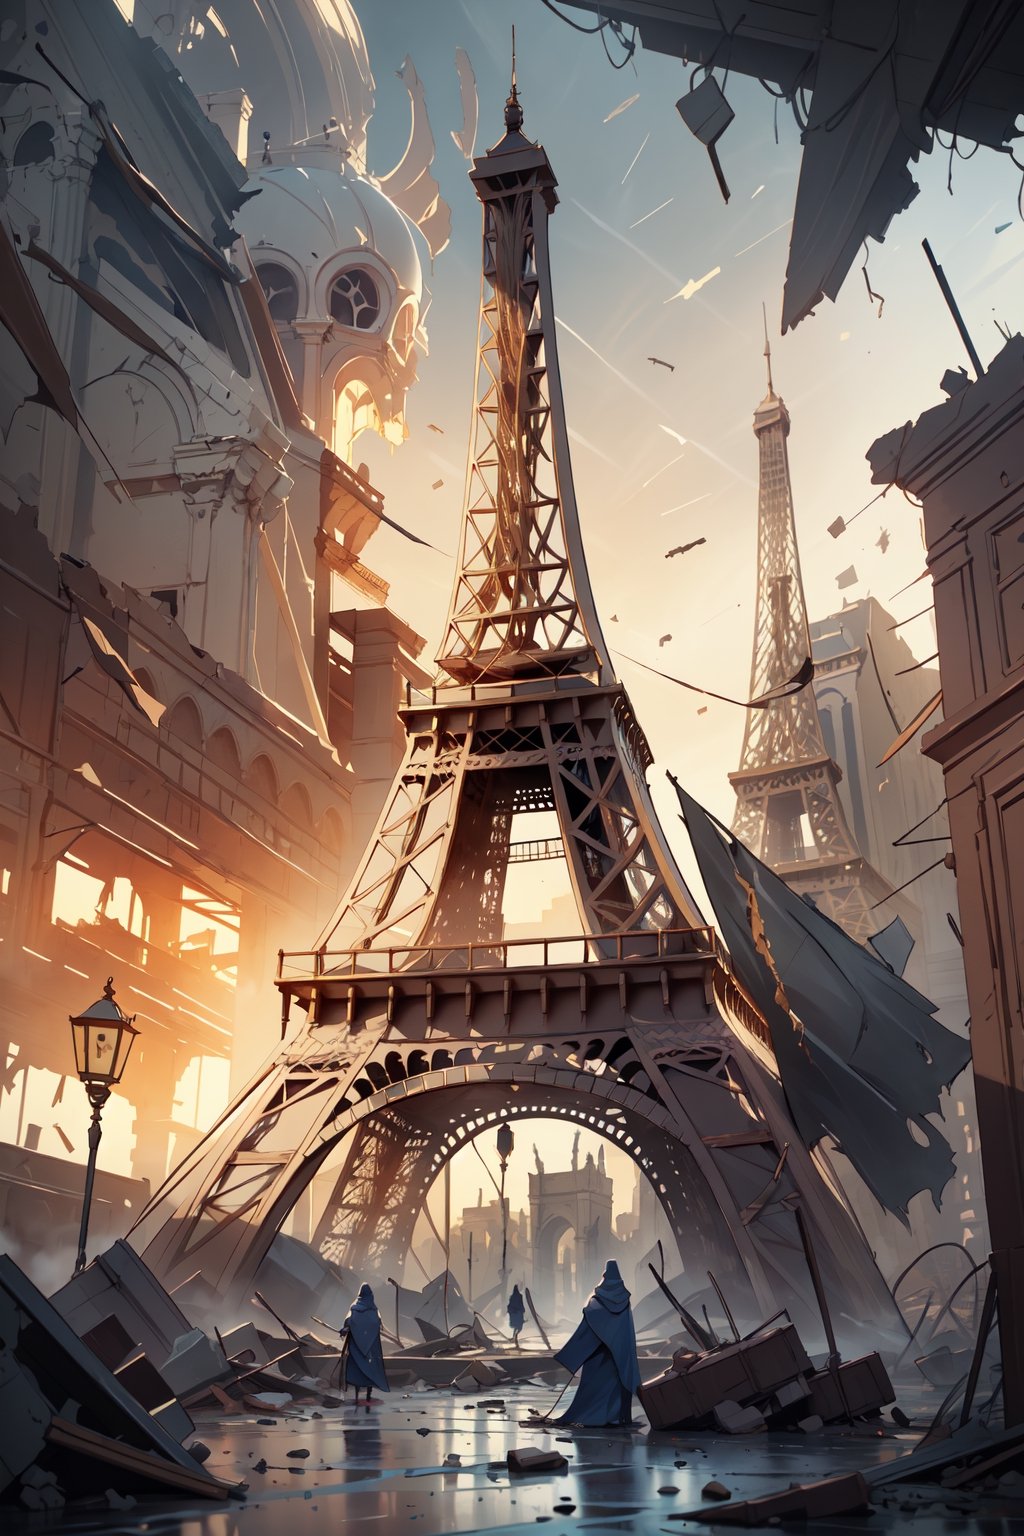 ((masterpiece, best quality)) medieval high fantasy illustrations vivid colors moody lighting atmospheric environment campaign setting bustling ruins littered debris destroyed Eiffel Tower